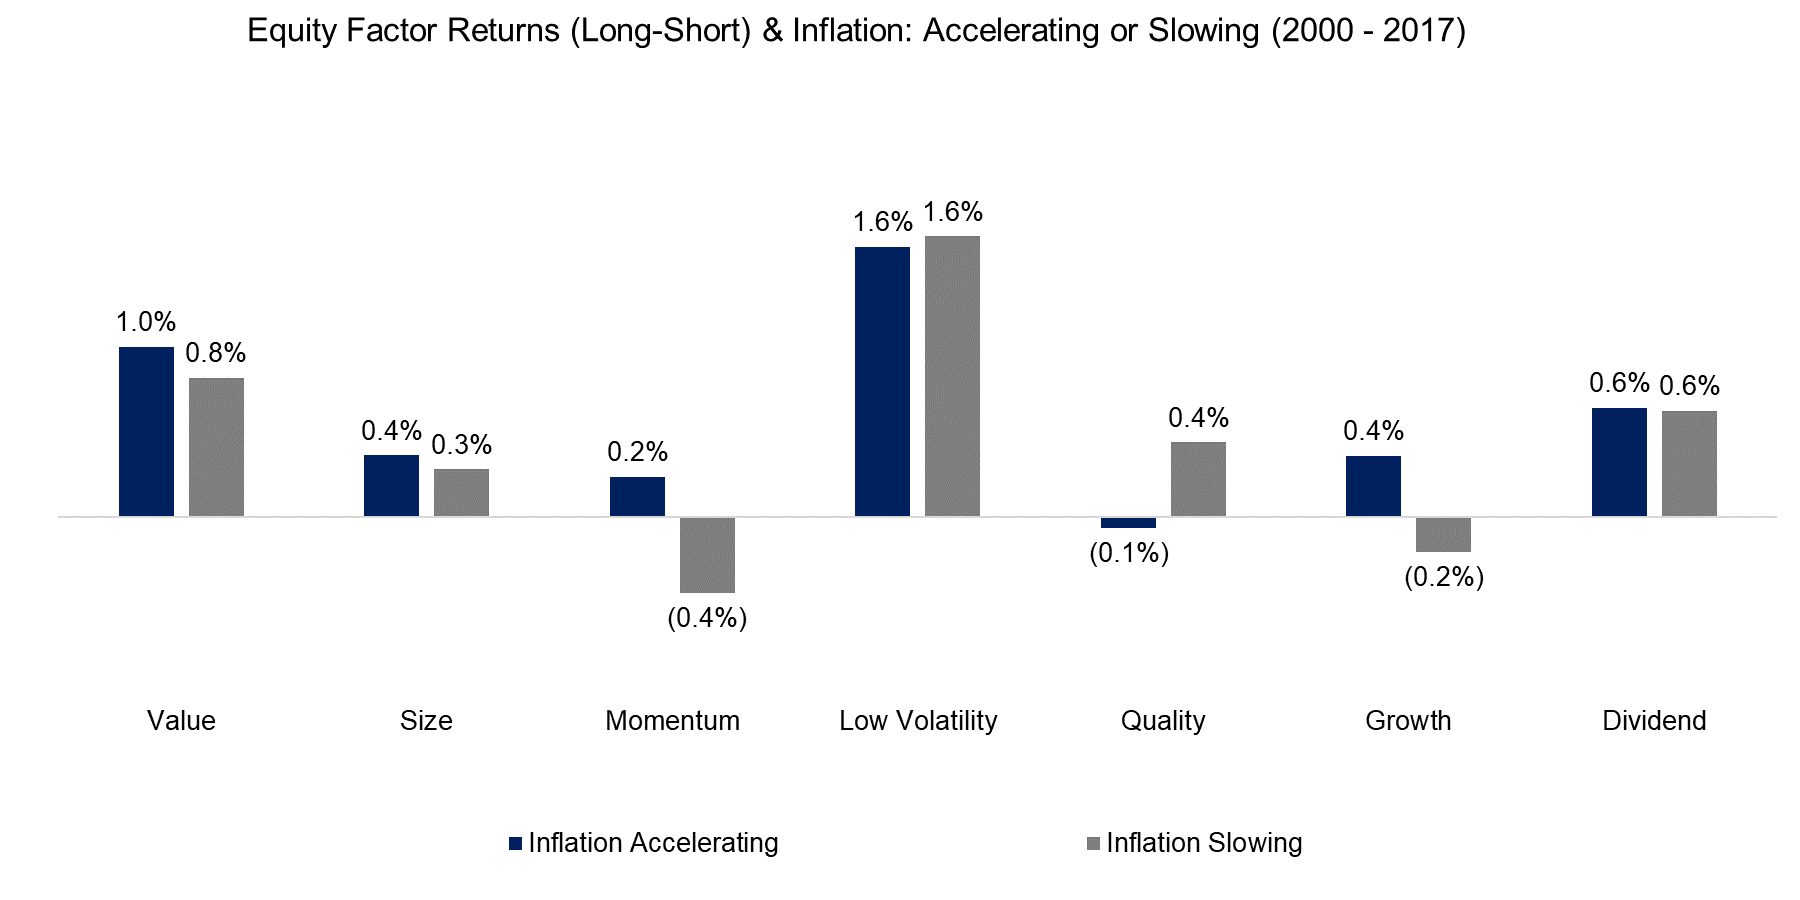 Equity Factor Returns (Long-Short) & Inflation Accelerating or Slowing (2000 - 2017)